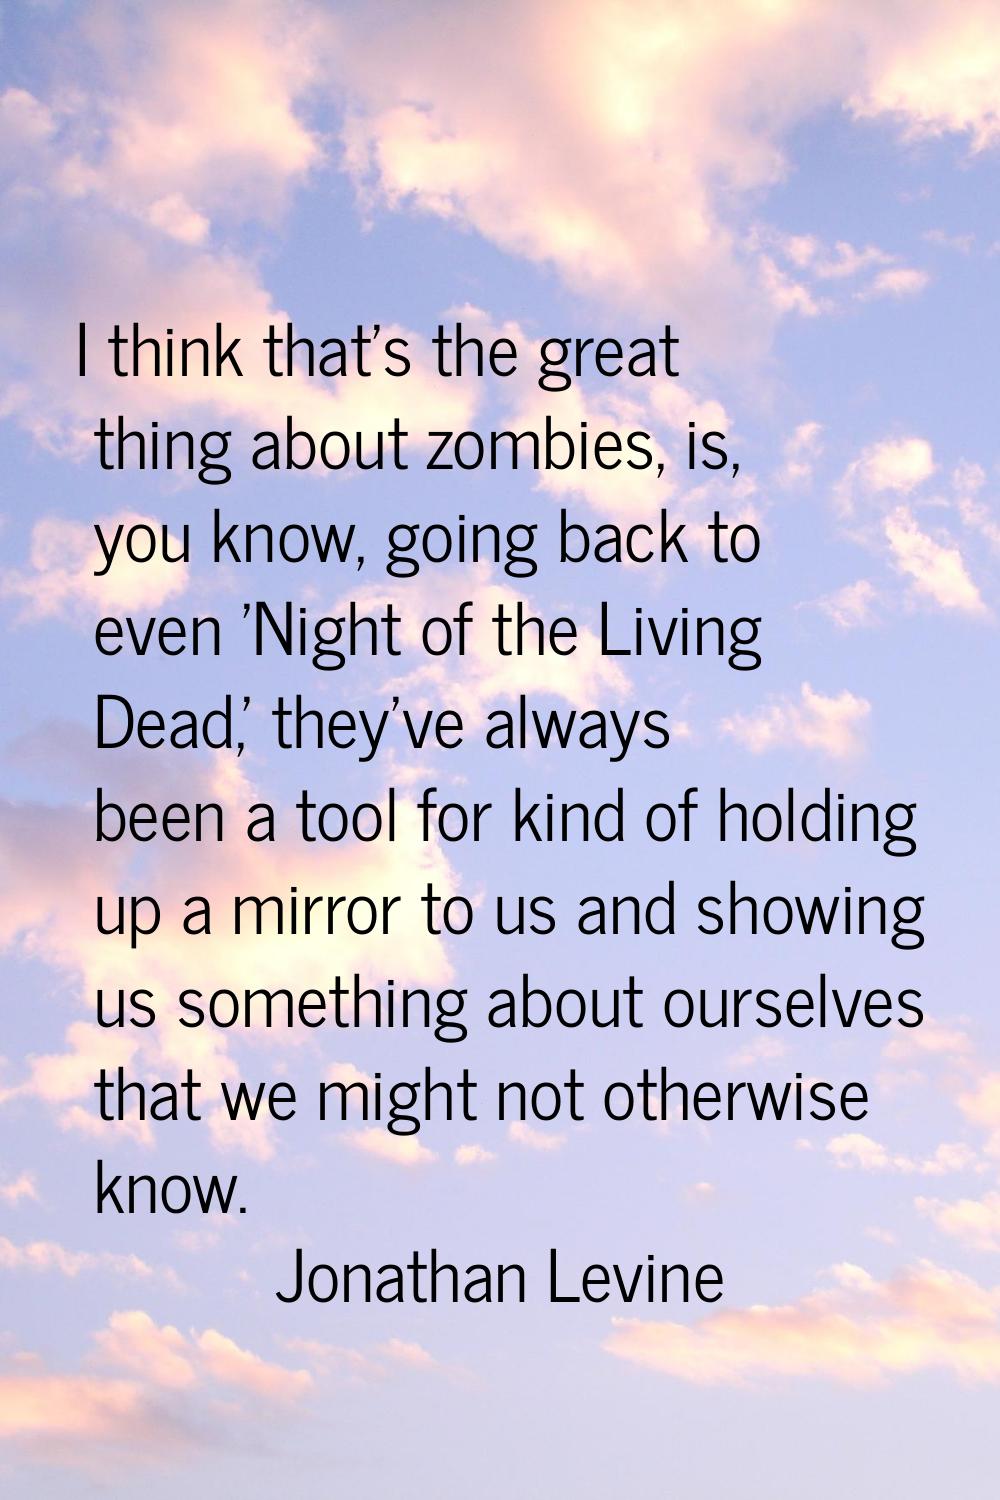 I think that's the great thing about zombies, is, you know, going back to even 'Night of the Living